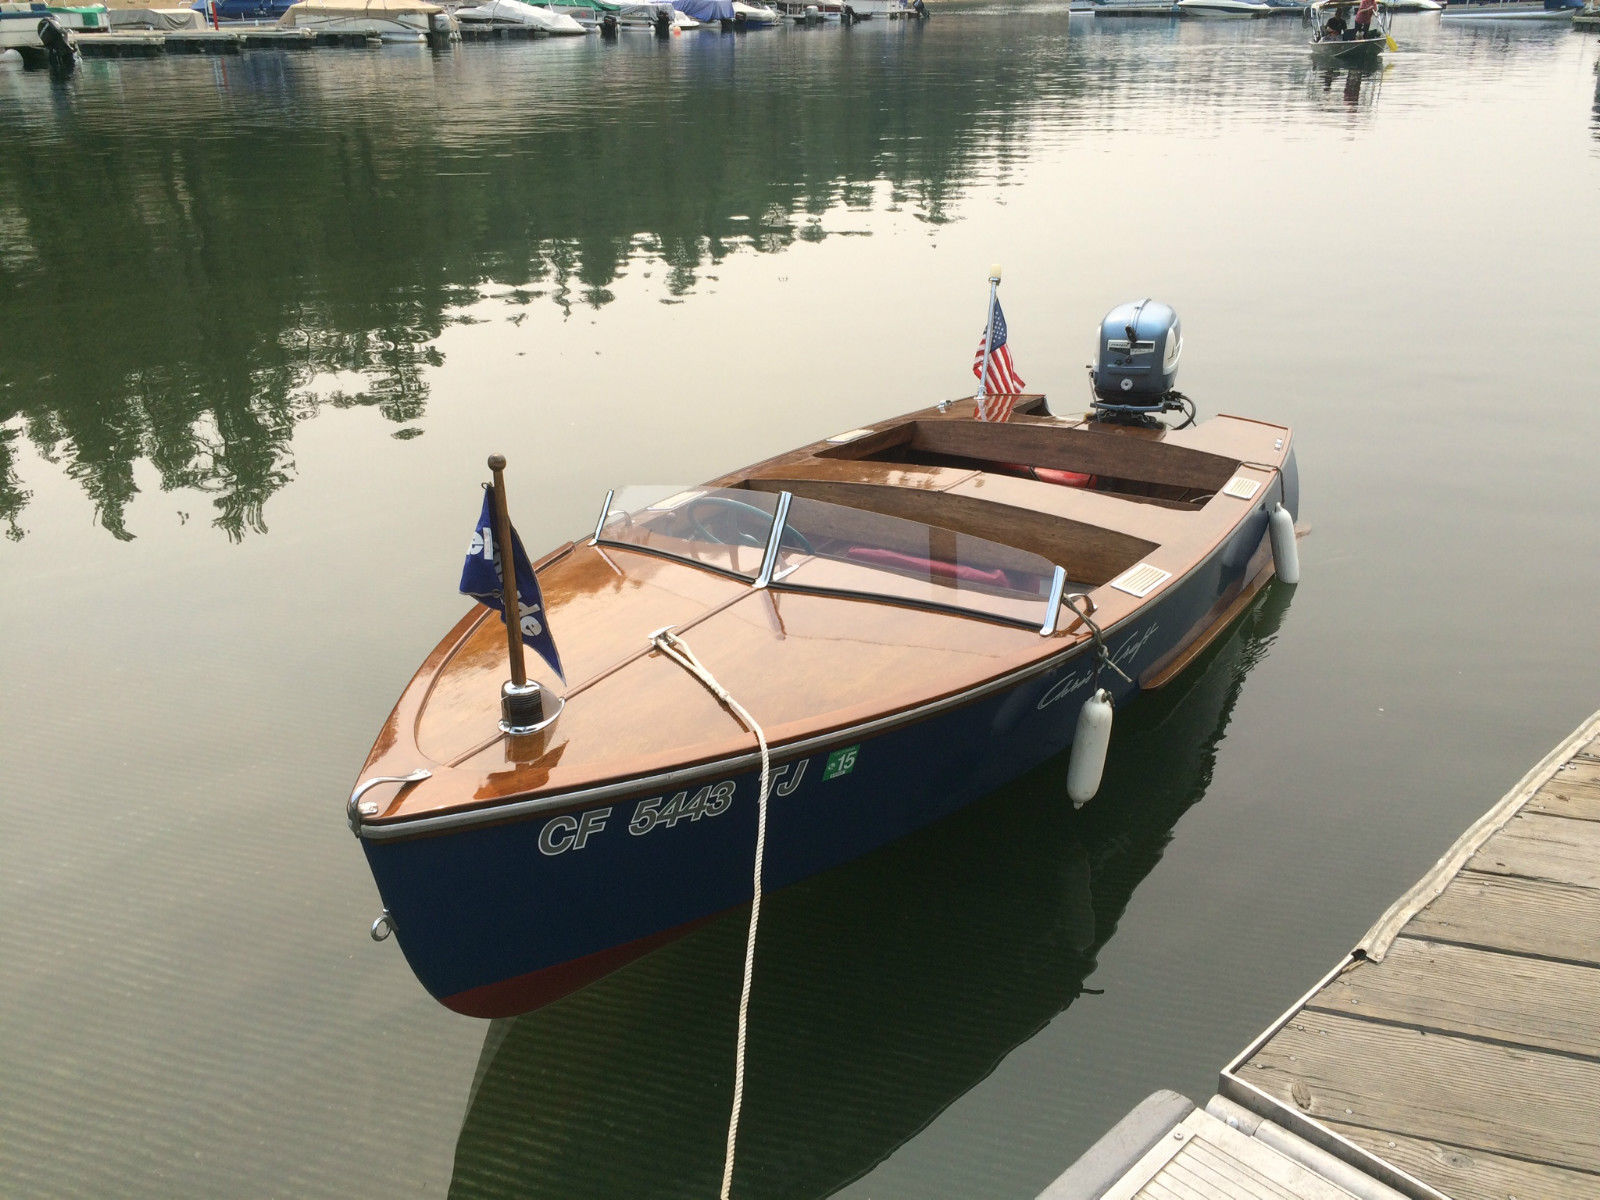 chris craft kit 1952 for sale for $3,200 - boats-from-usa.com